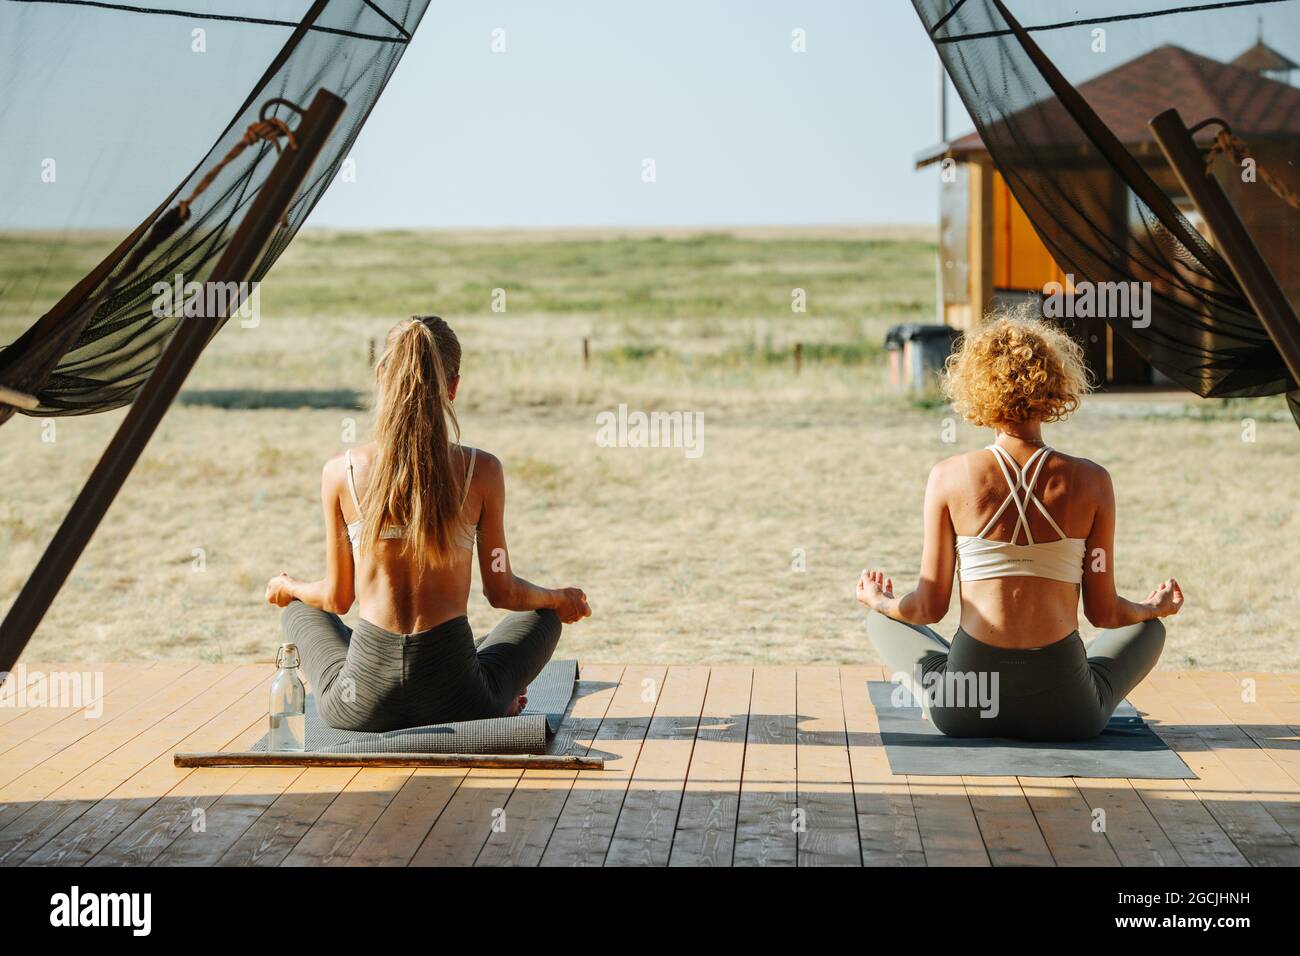 https://c8.alamy.com/comp/2GCJHNH/two-women-meditating-on-a-doorstep-of-a-big-tent-from-behind-sitting-in-easy-pose-doing-yoga-beautiful-plain-steppe-all-around-anti-mosquito-net-2GCJHNH.jpg